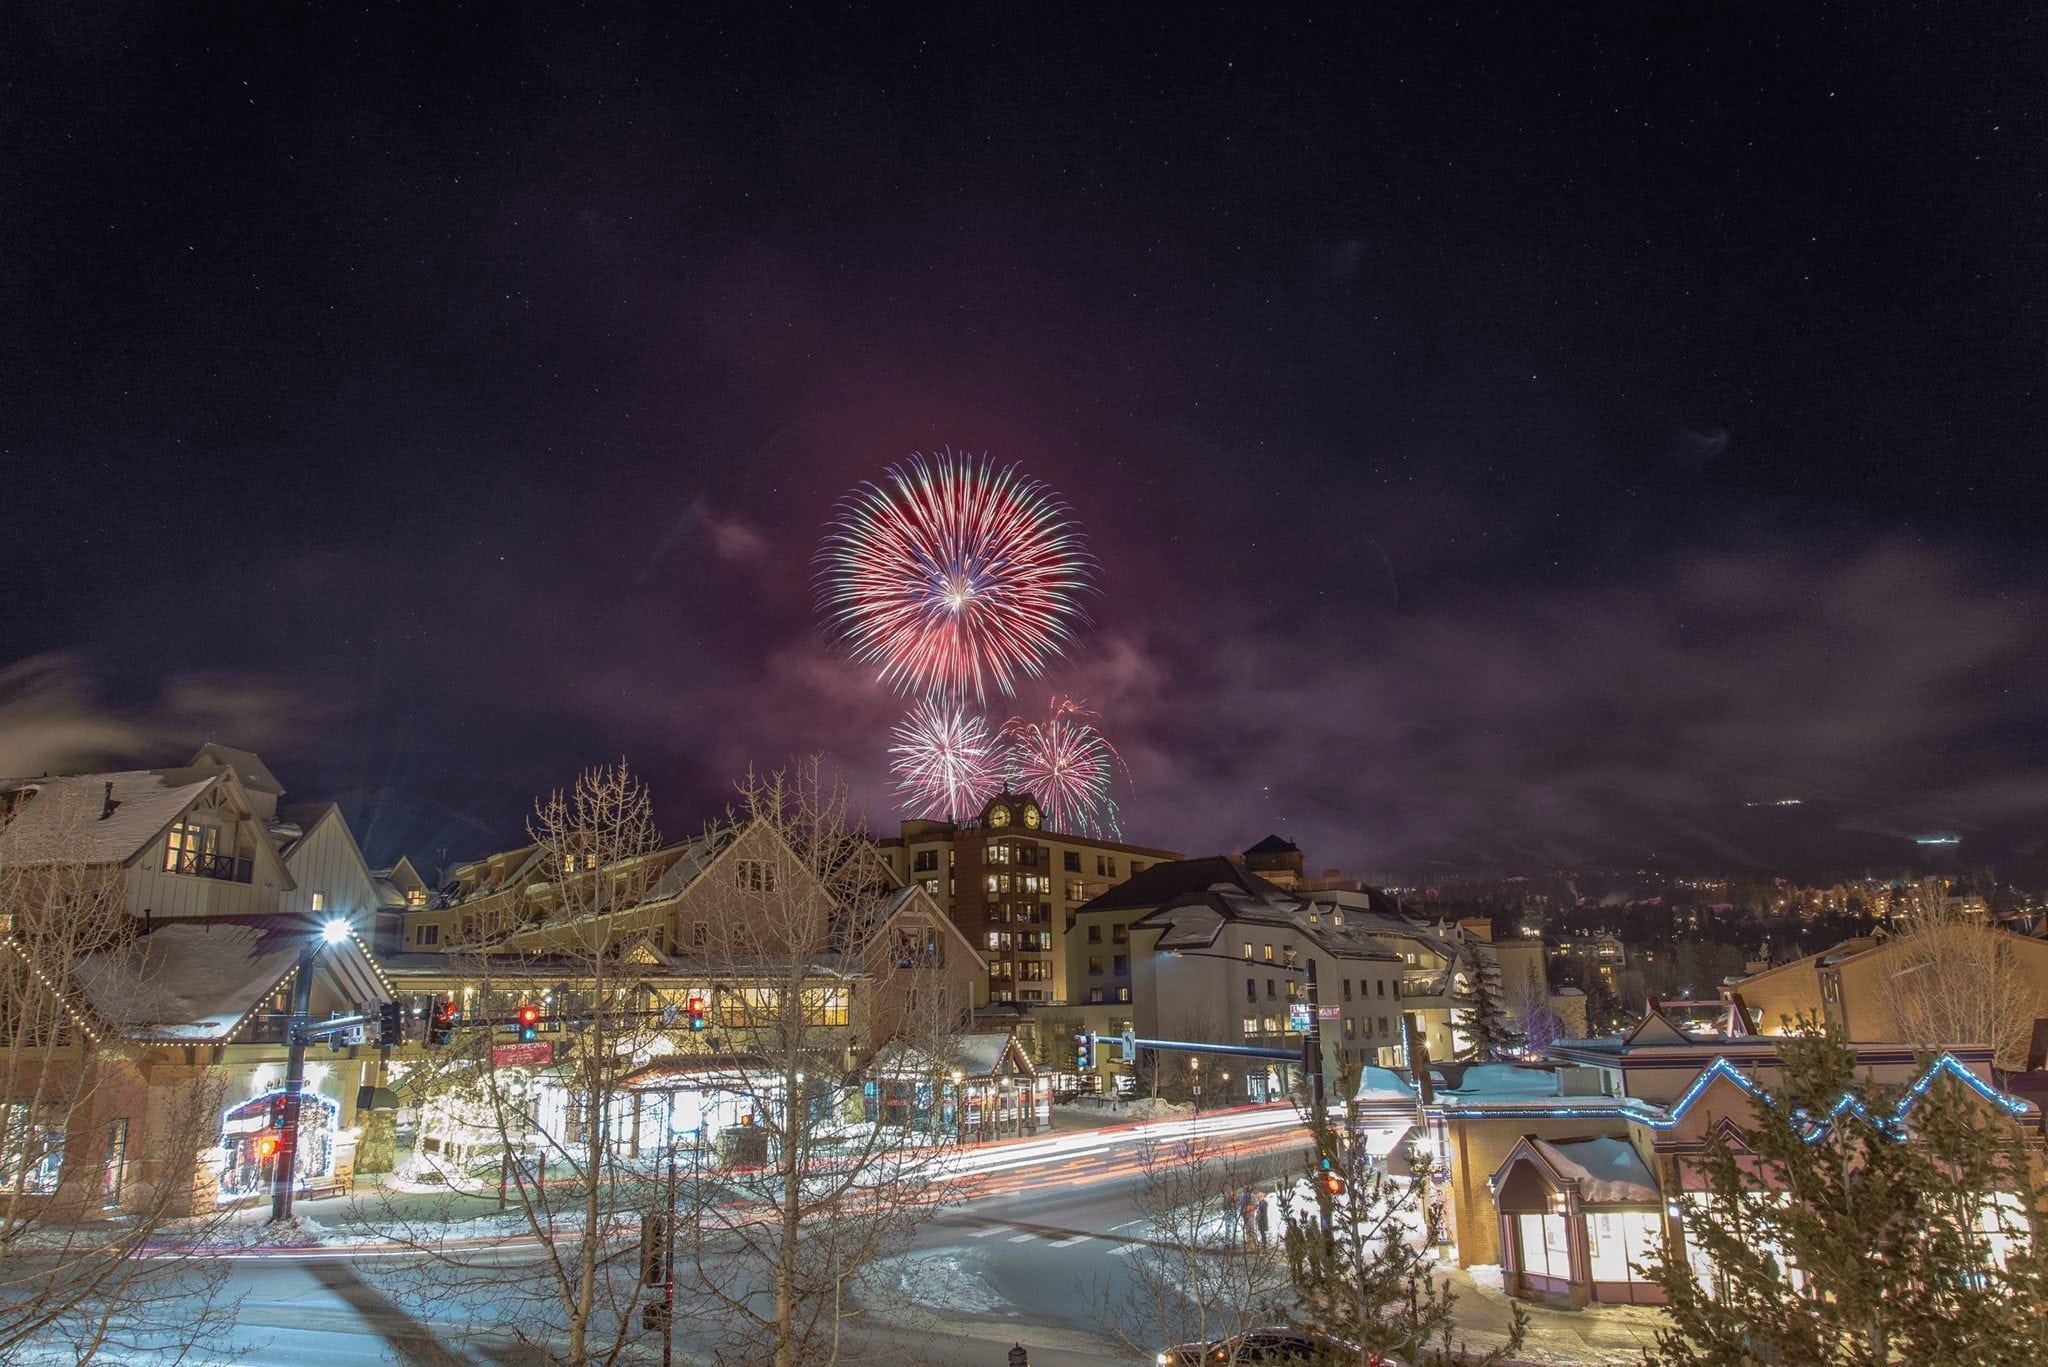 Breckenridge New Year's Eve fireworks in the sky above downtown Breckenridge